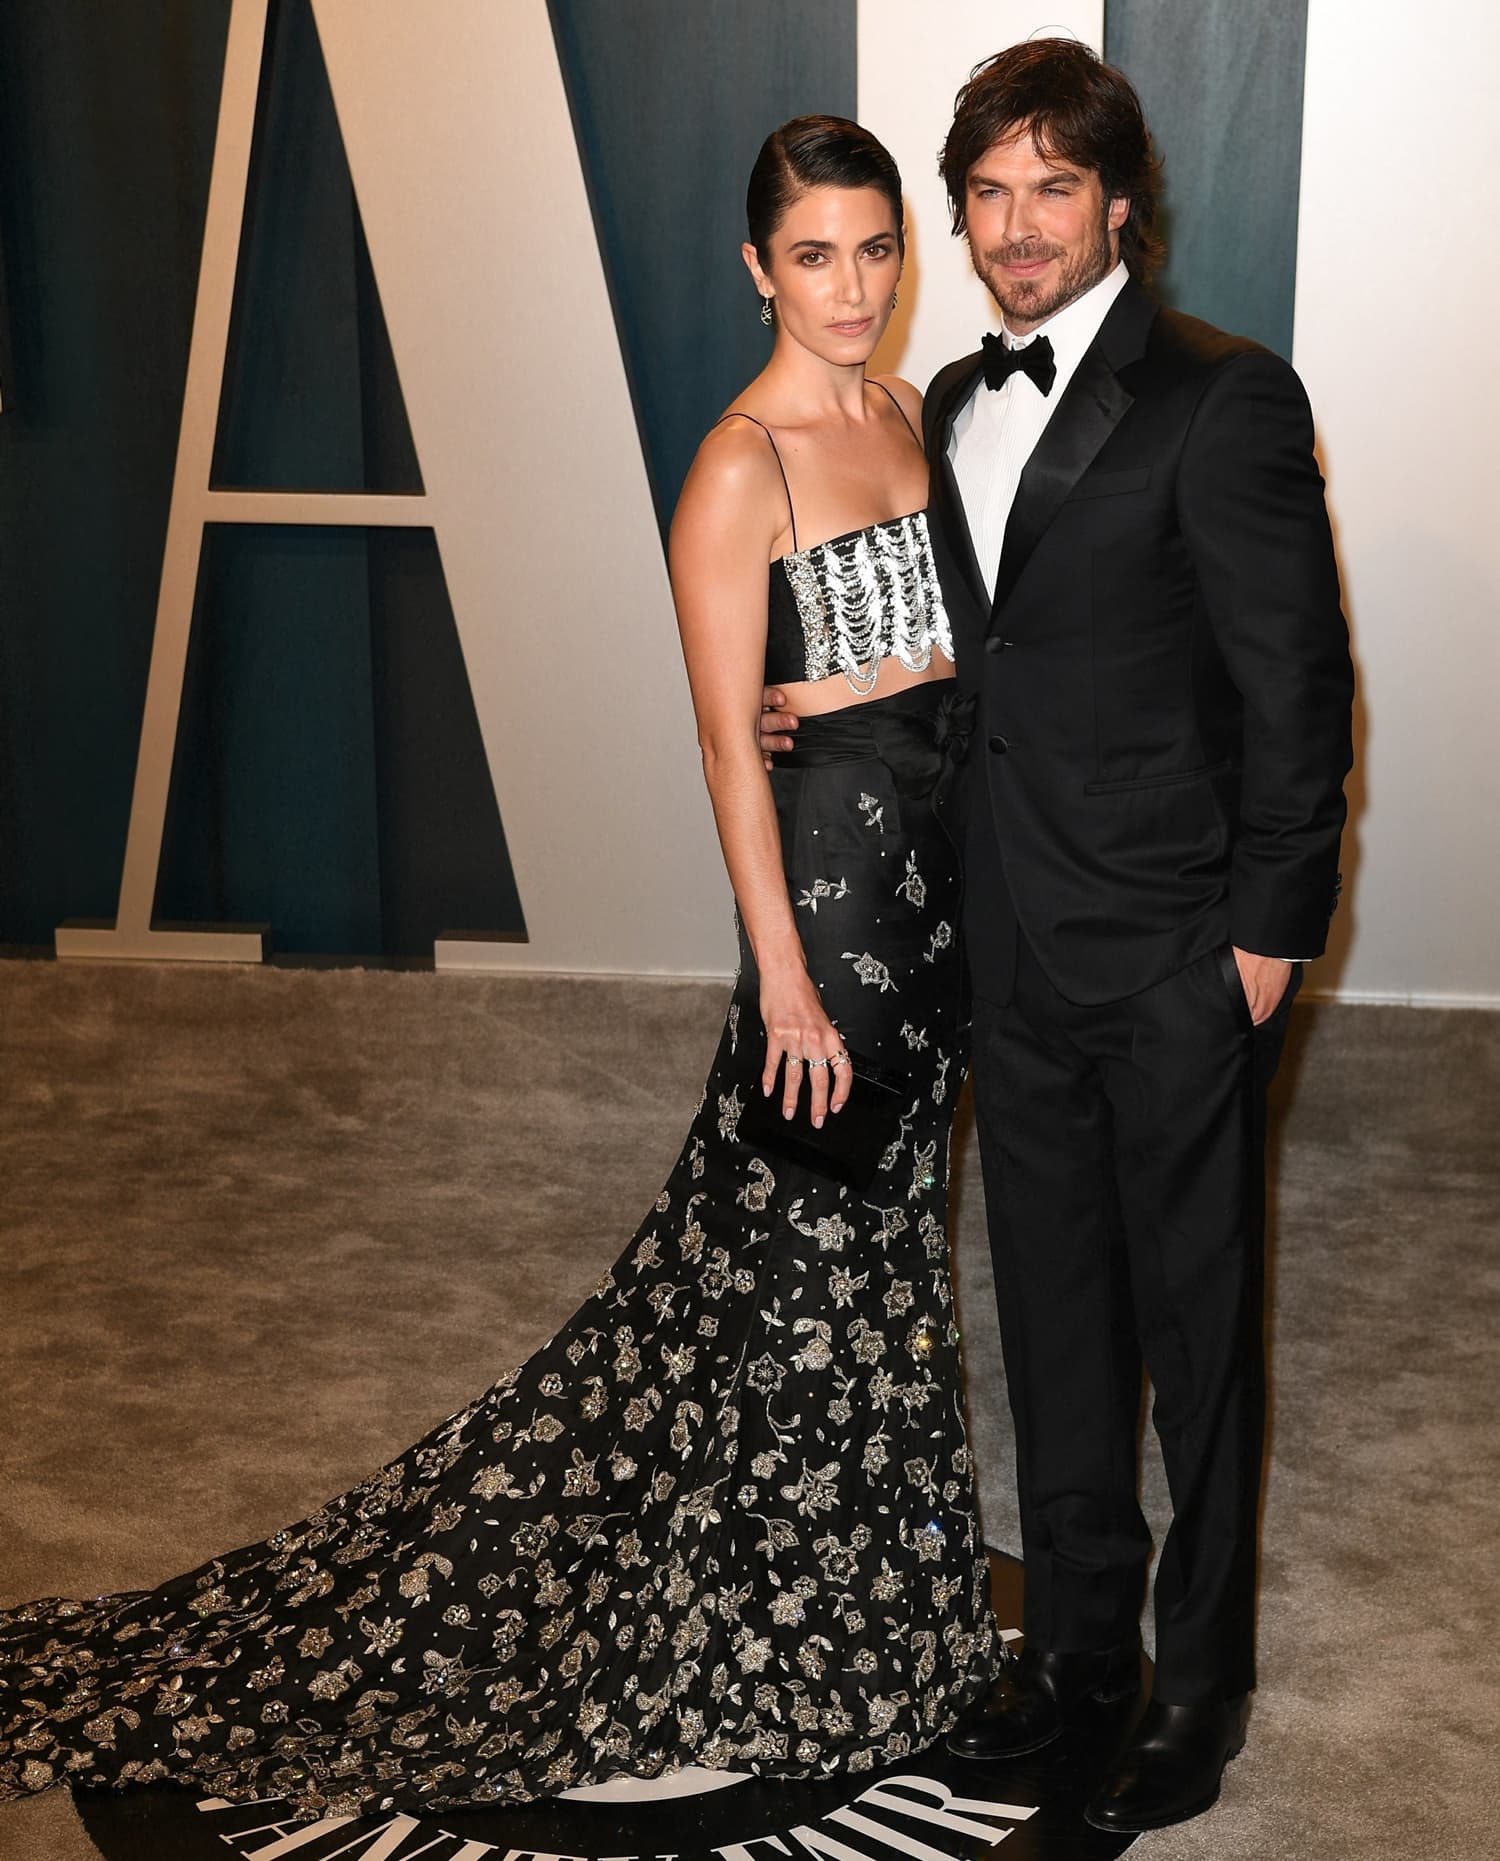 Nikki Reed, in an Armani Privé silver embroidered bandeau top paired with a black silk skirt adorned in silver embroidered floral details and accented by a silk organza bow tied at the waist, with her husband Ian Somerhalder